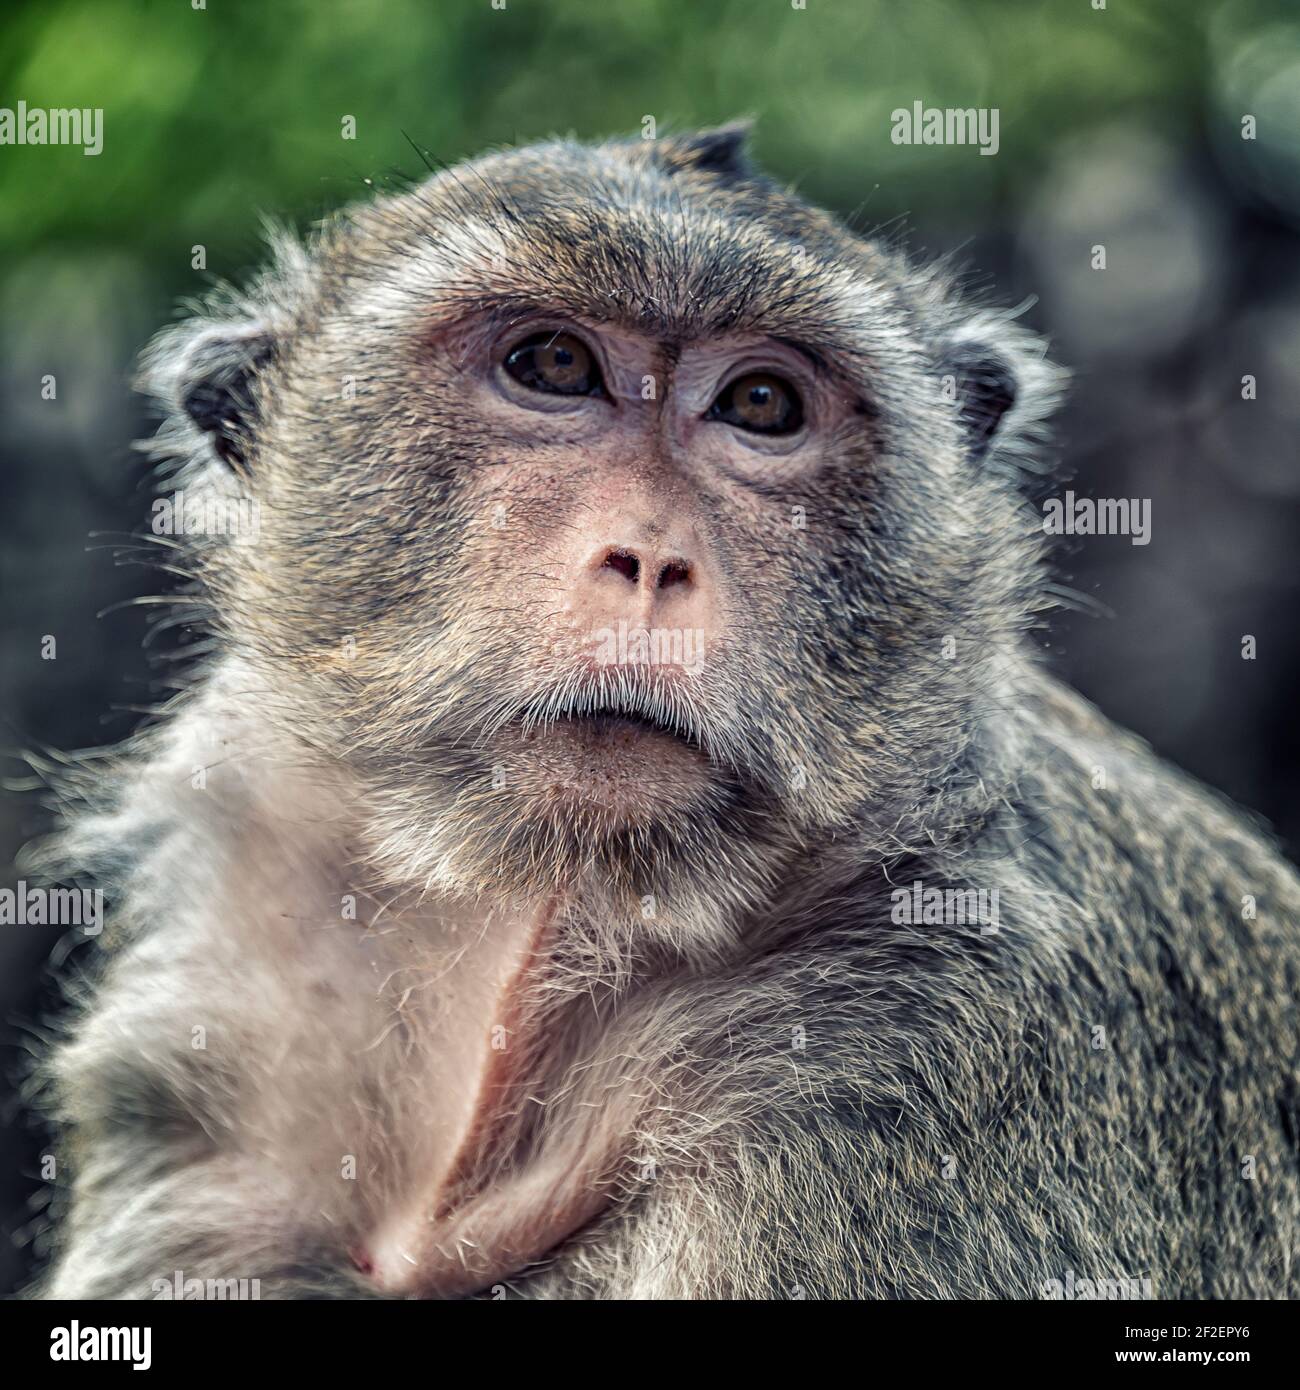 Long-tailed macaque portrait Stock Photo